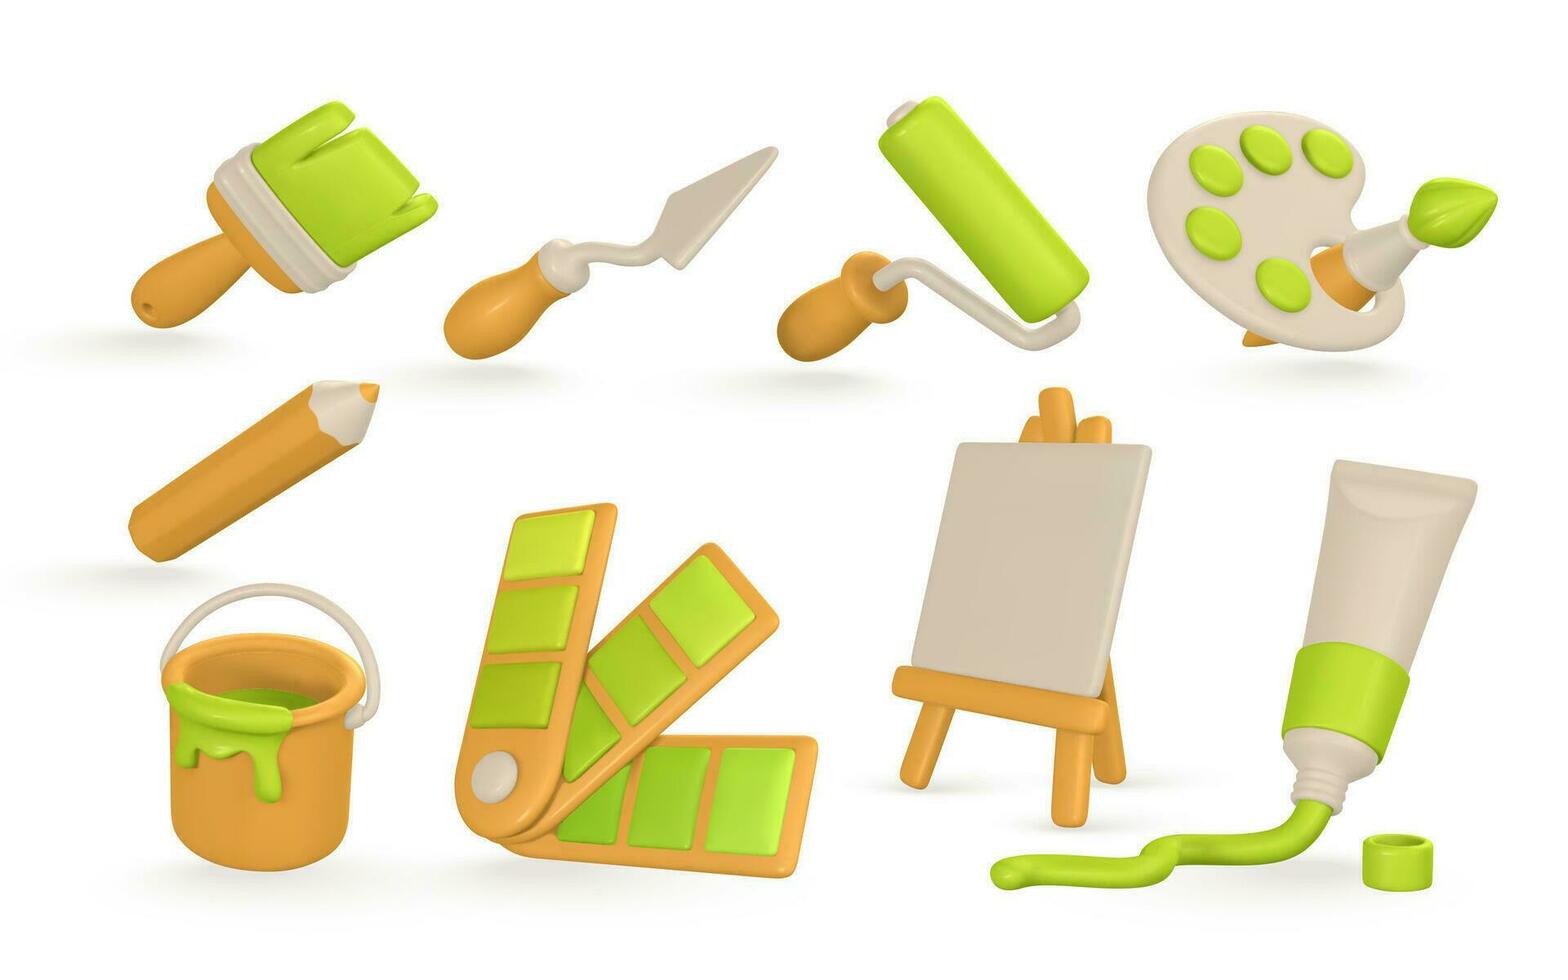 3d realistic tools for paint. Easel, paint tube, brush, roller brash, palette knife, color palette, pencil and tin of paint in cartoon style. Vector illustration